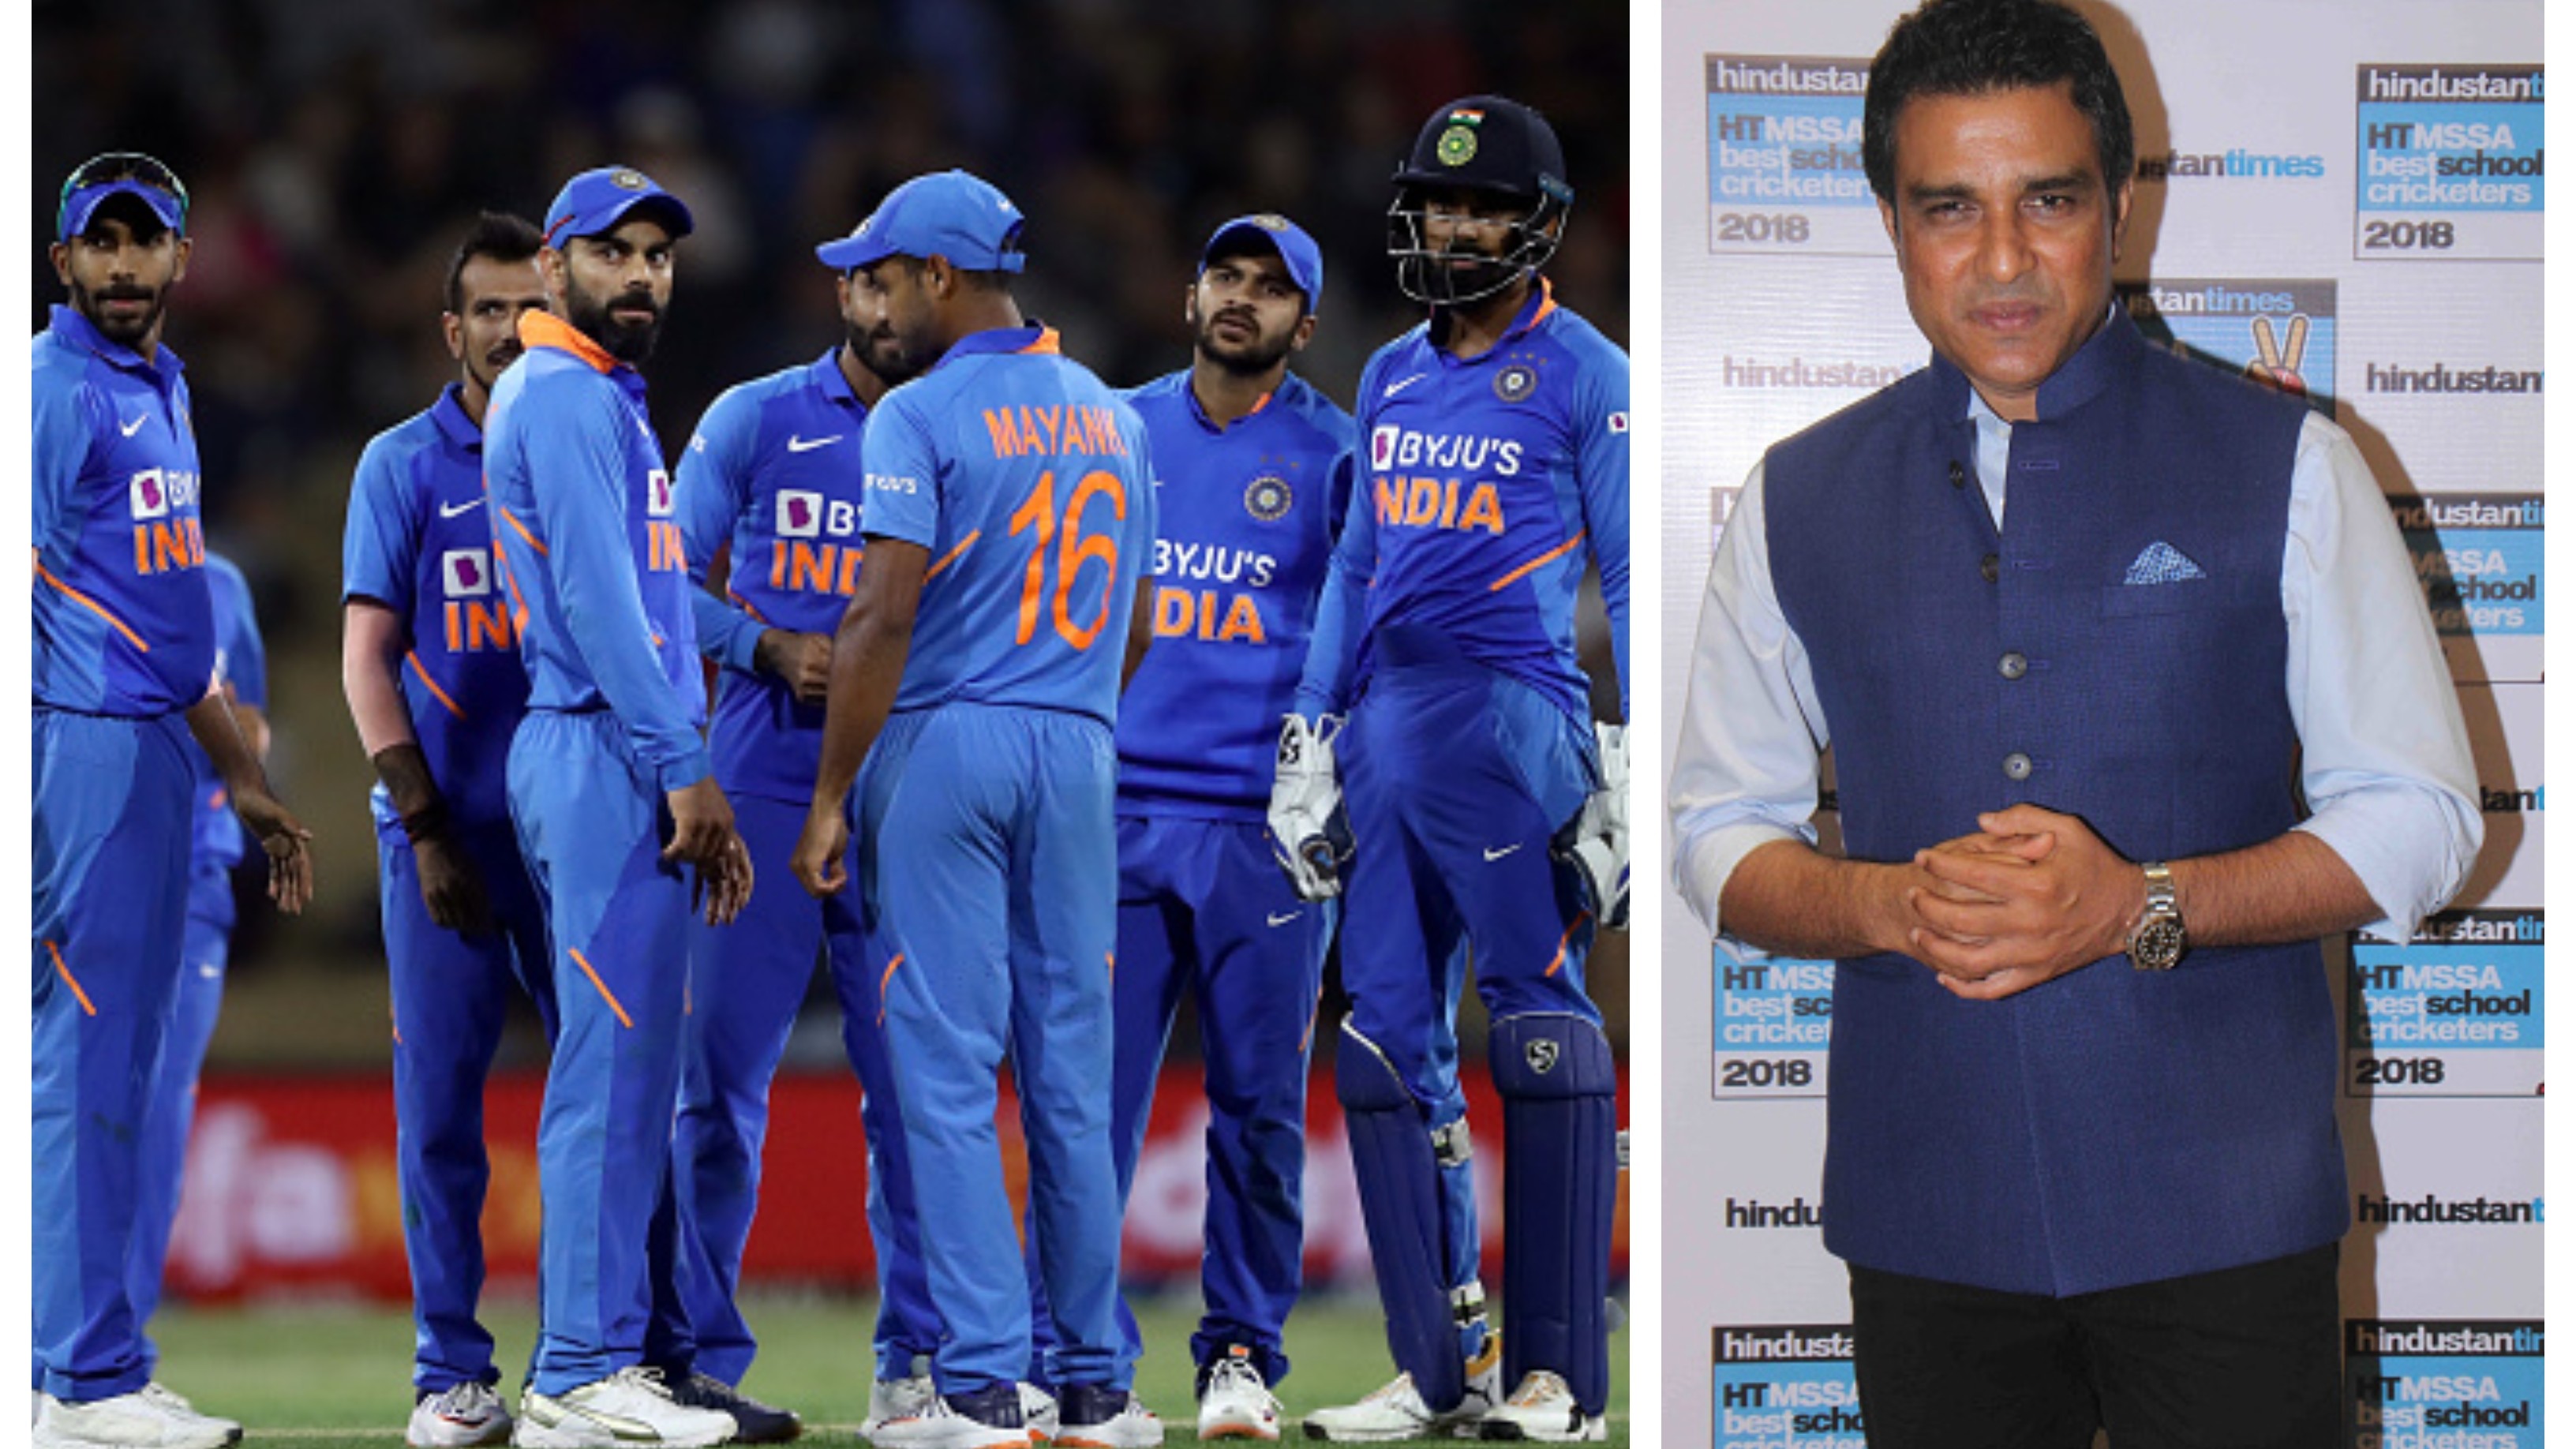 Manjrekar feels two IPL editions before next year's T20 World Cup will change Team India’s dynamics